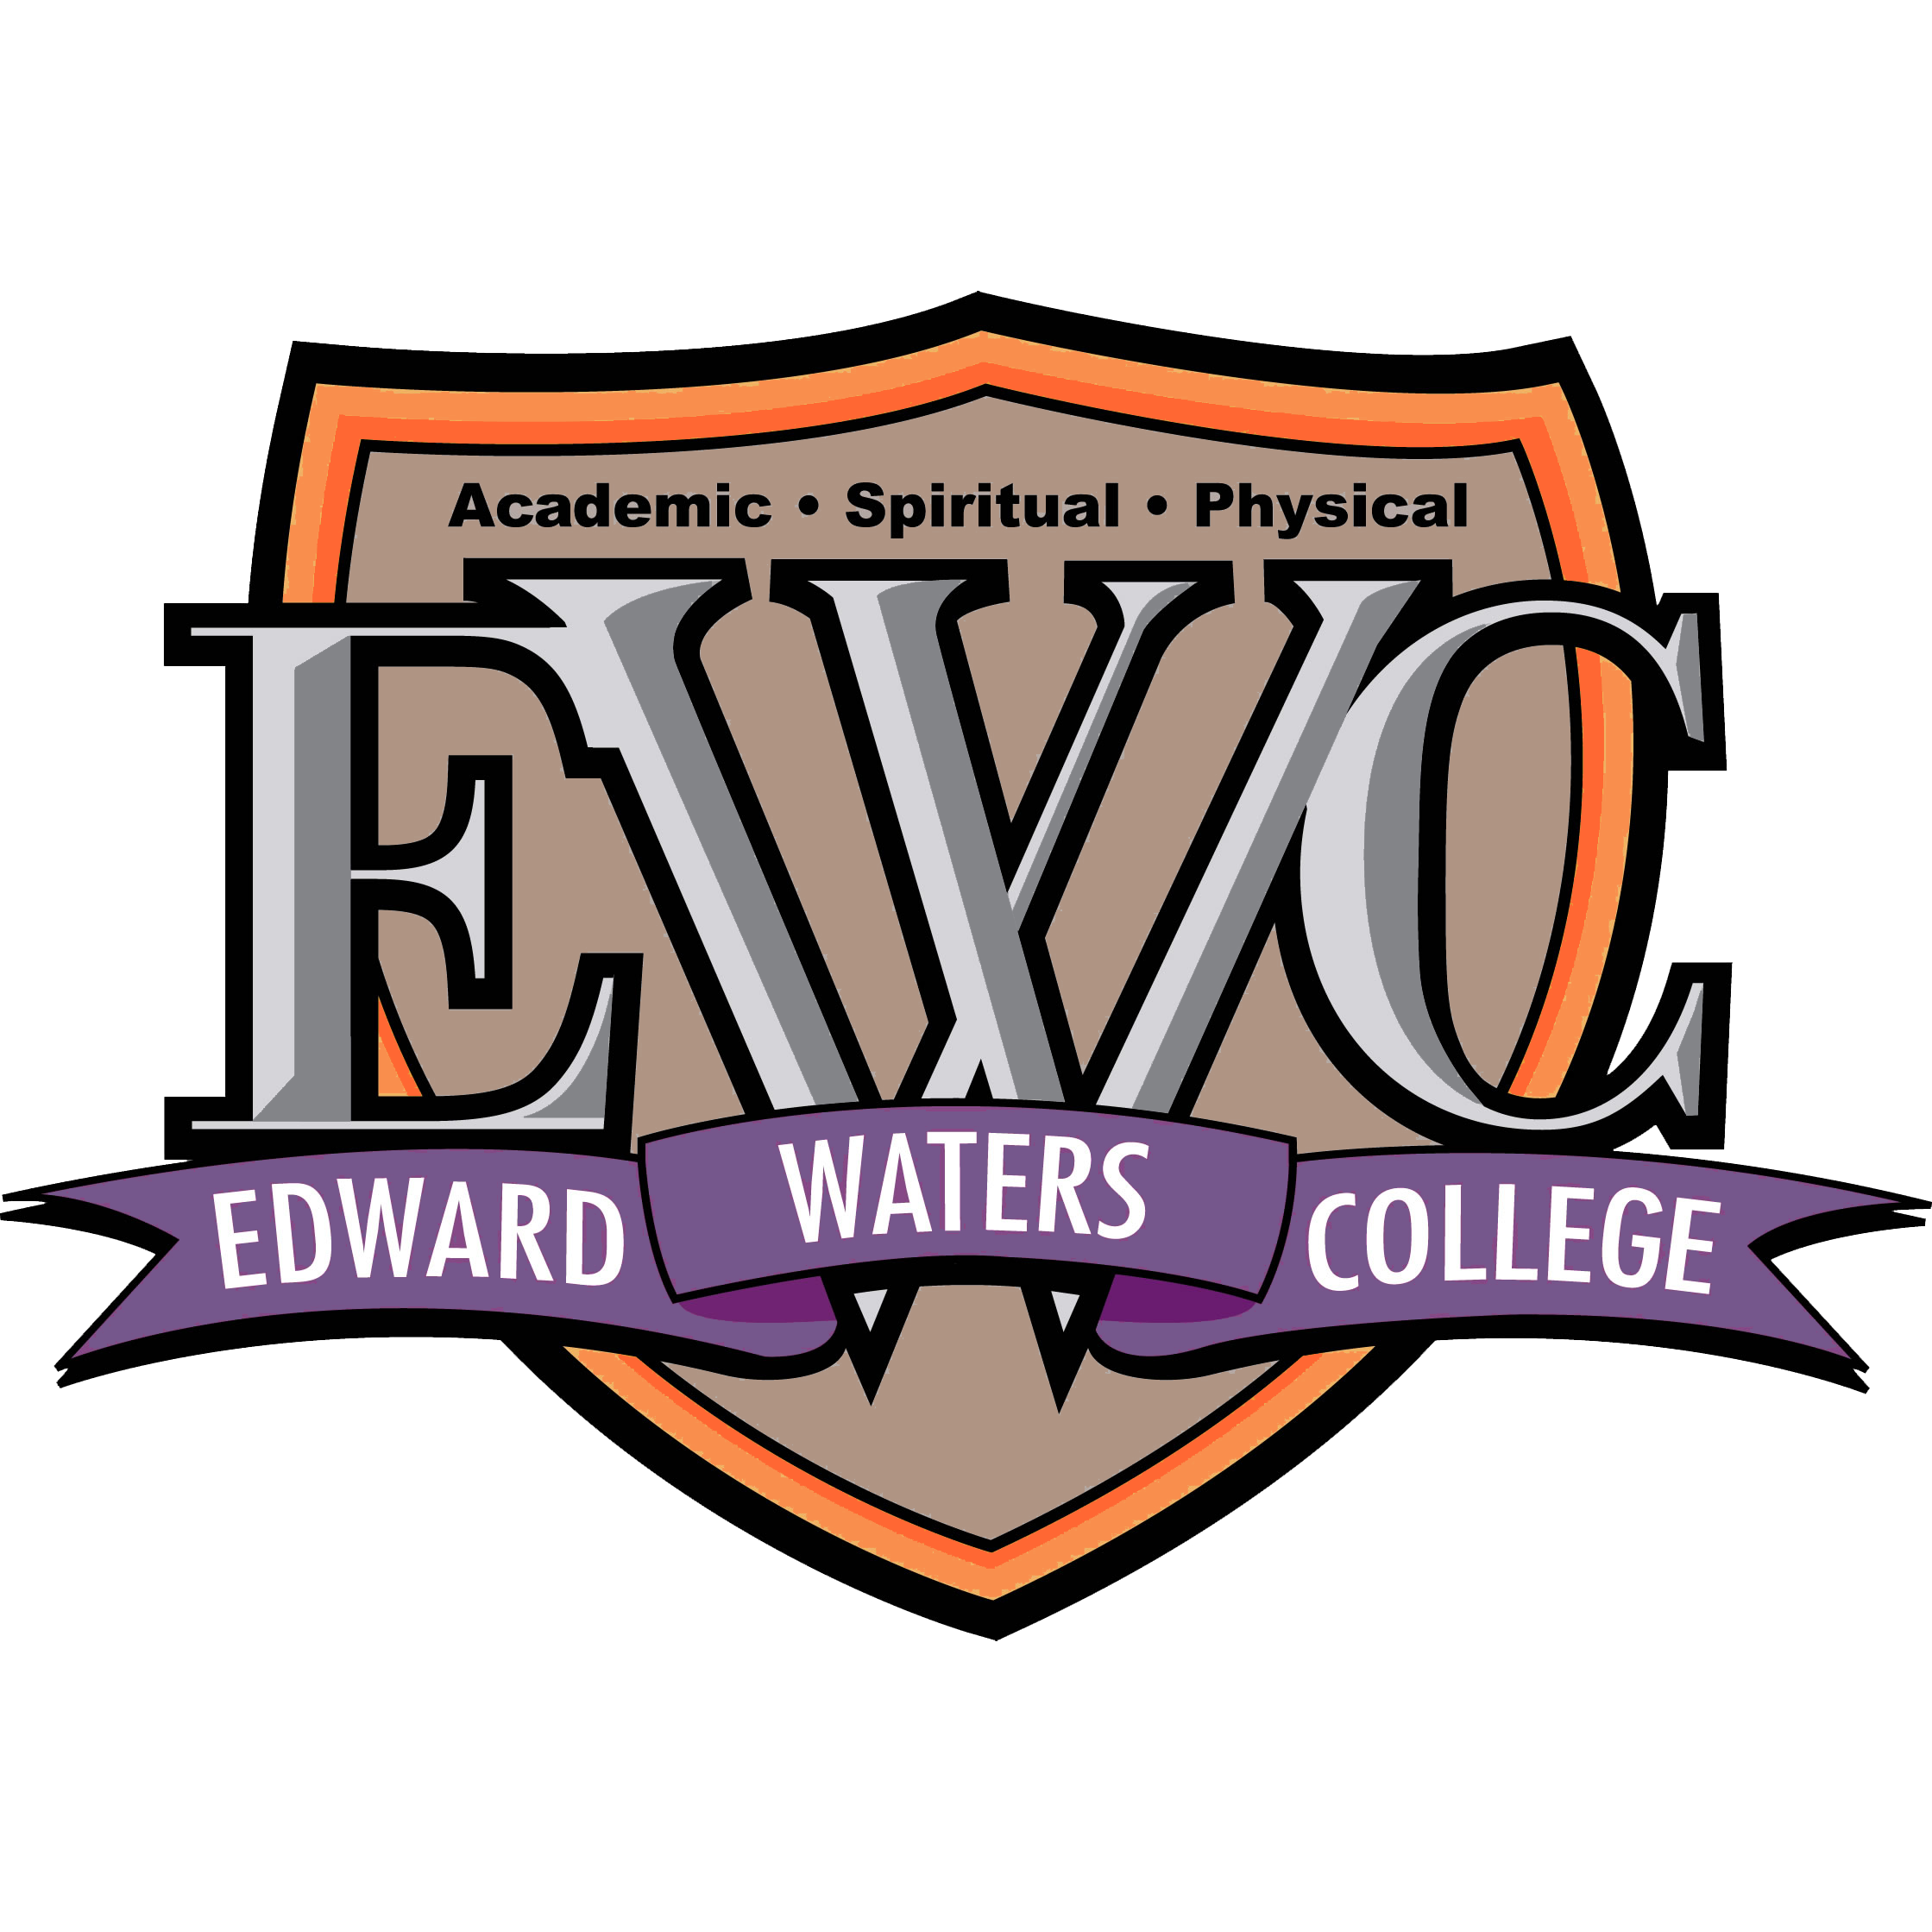 Edward Waters College